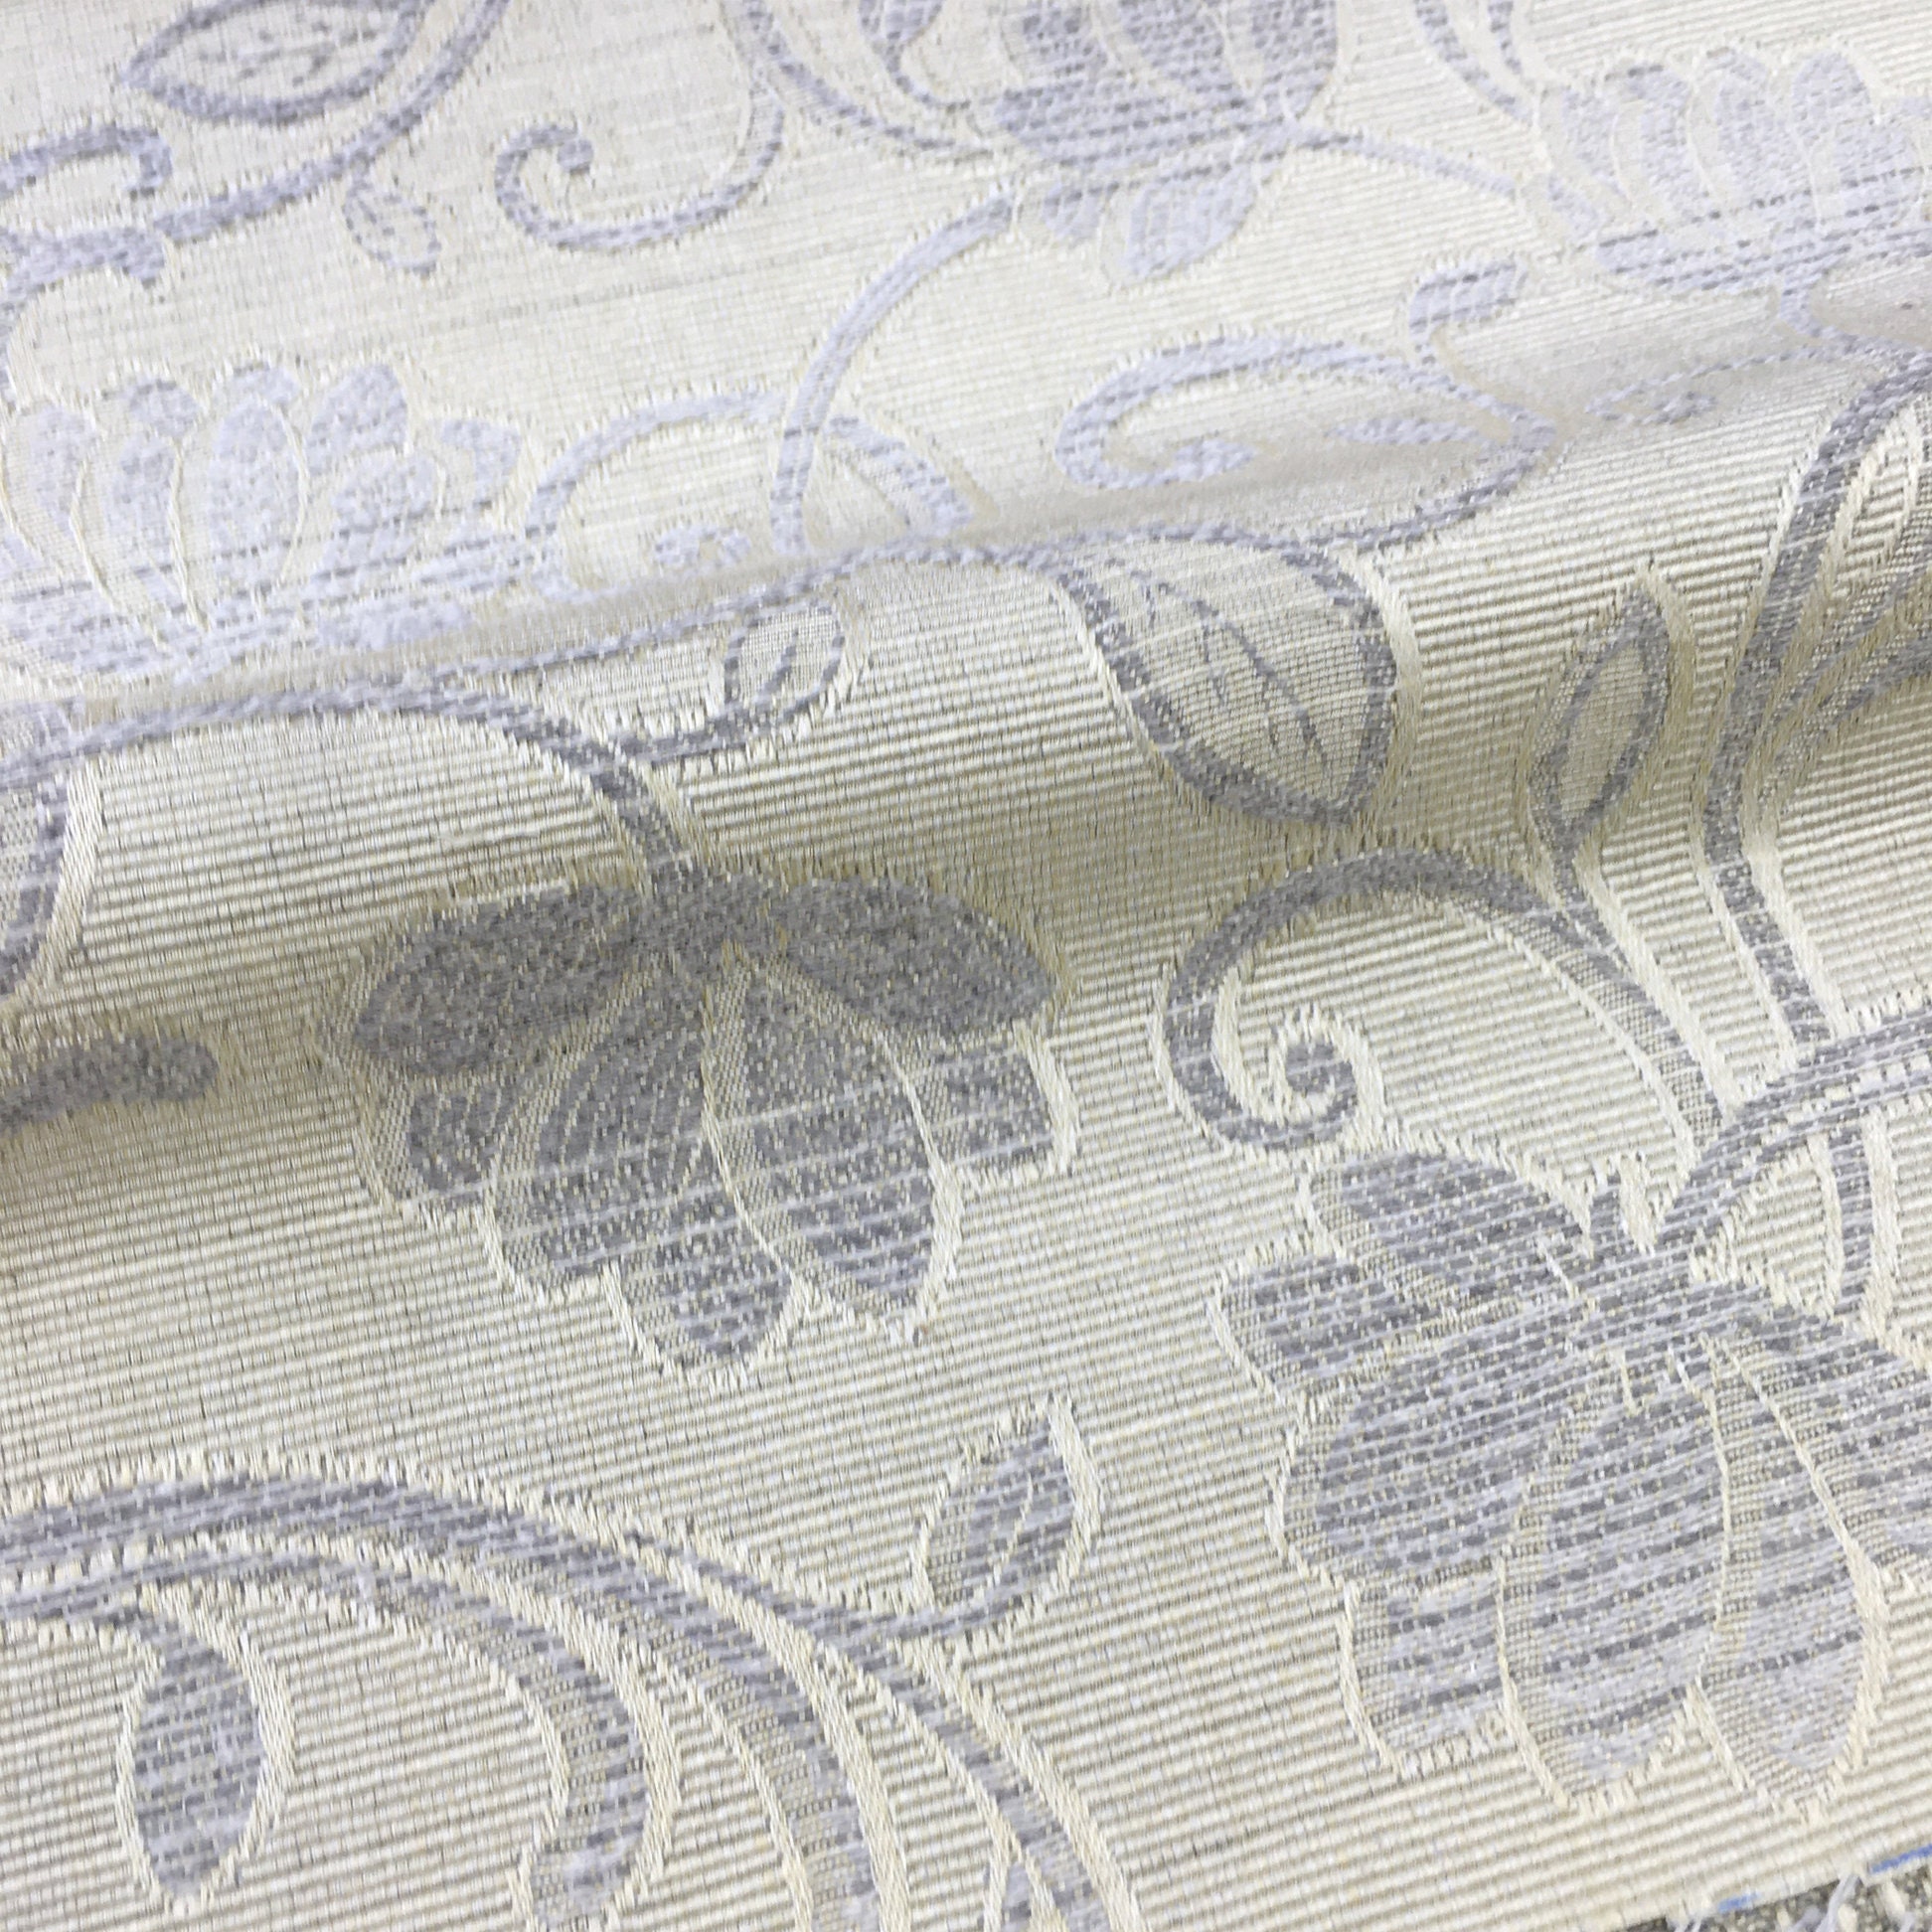 Vintage Damask - Fabric by the yard - White - Prestige Linens